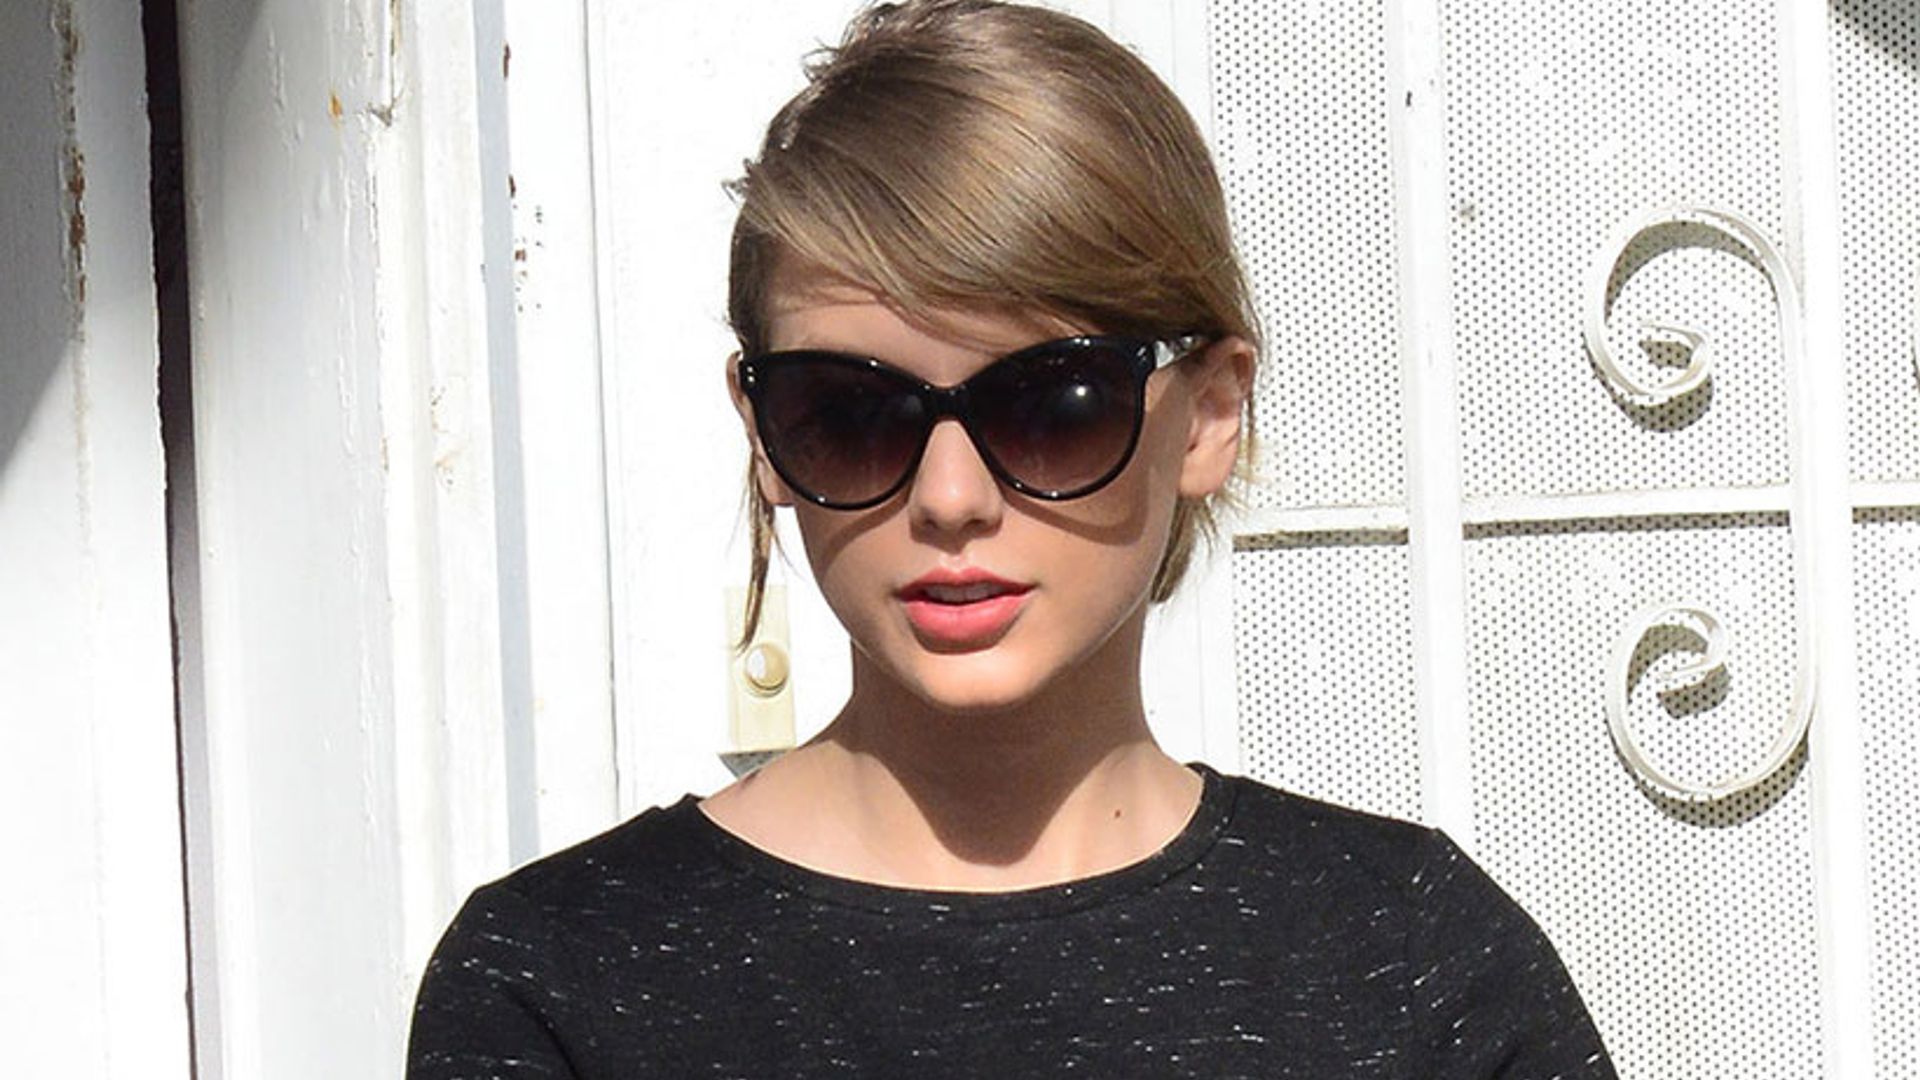 Taylor Swift takes the stand in sexual assault case: 'It was intentional'